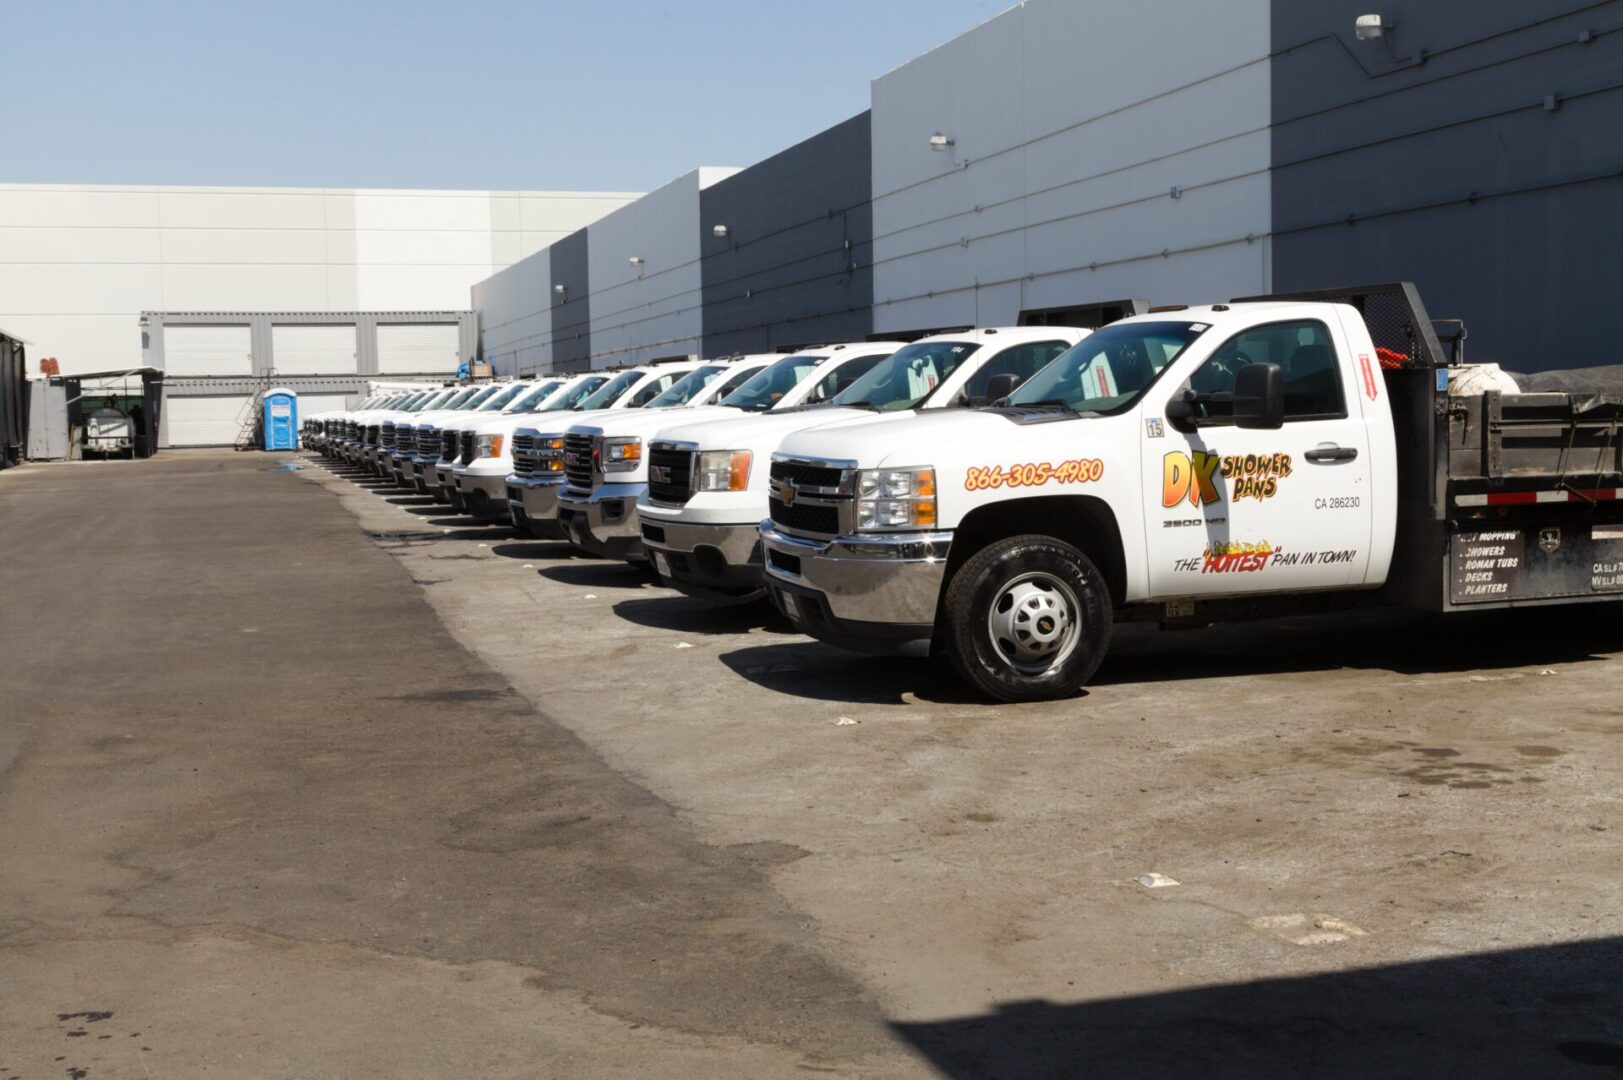 A row of white trucks parked in front of a building.